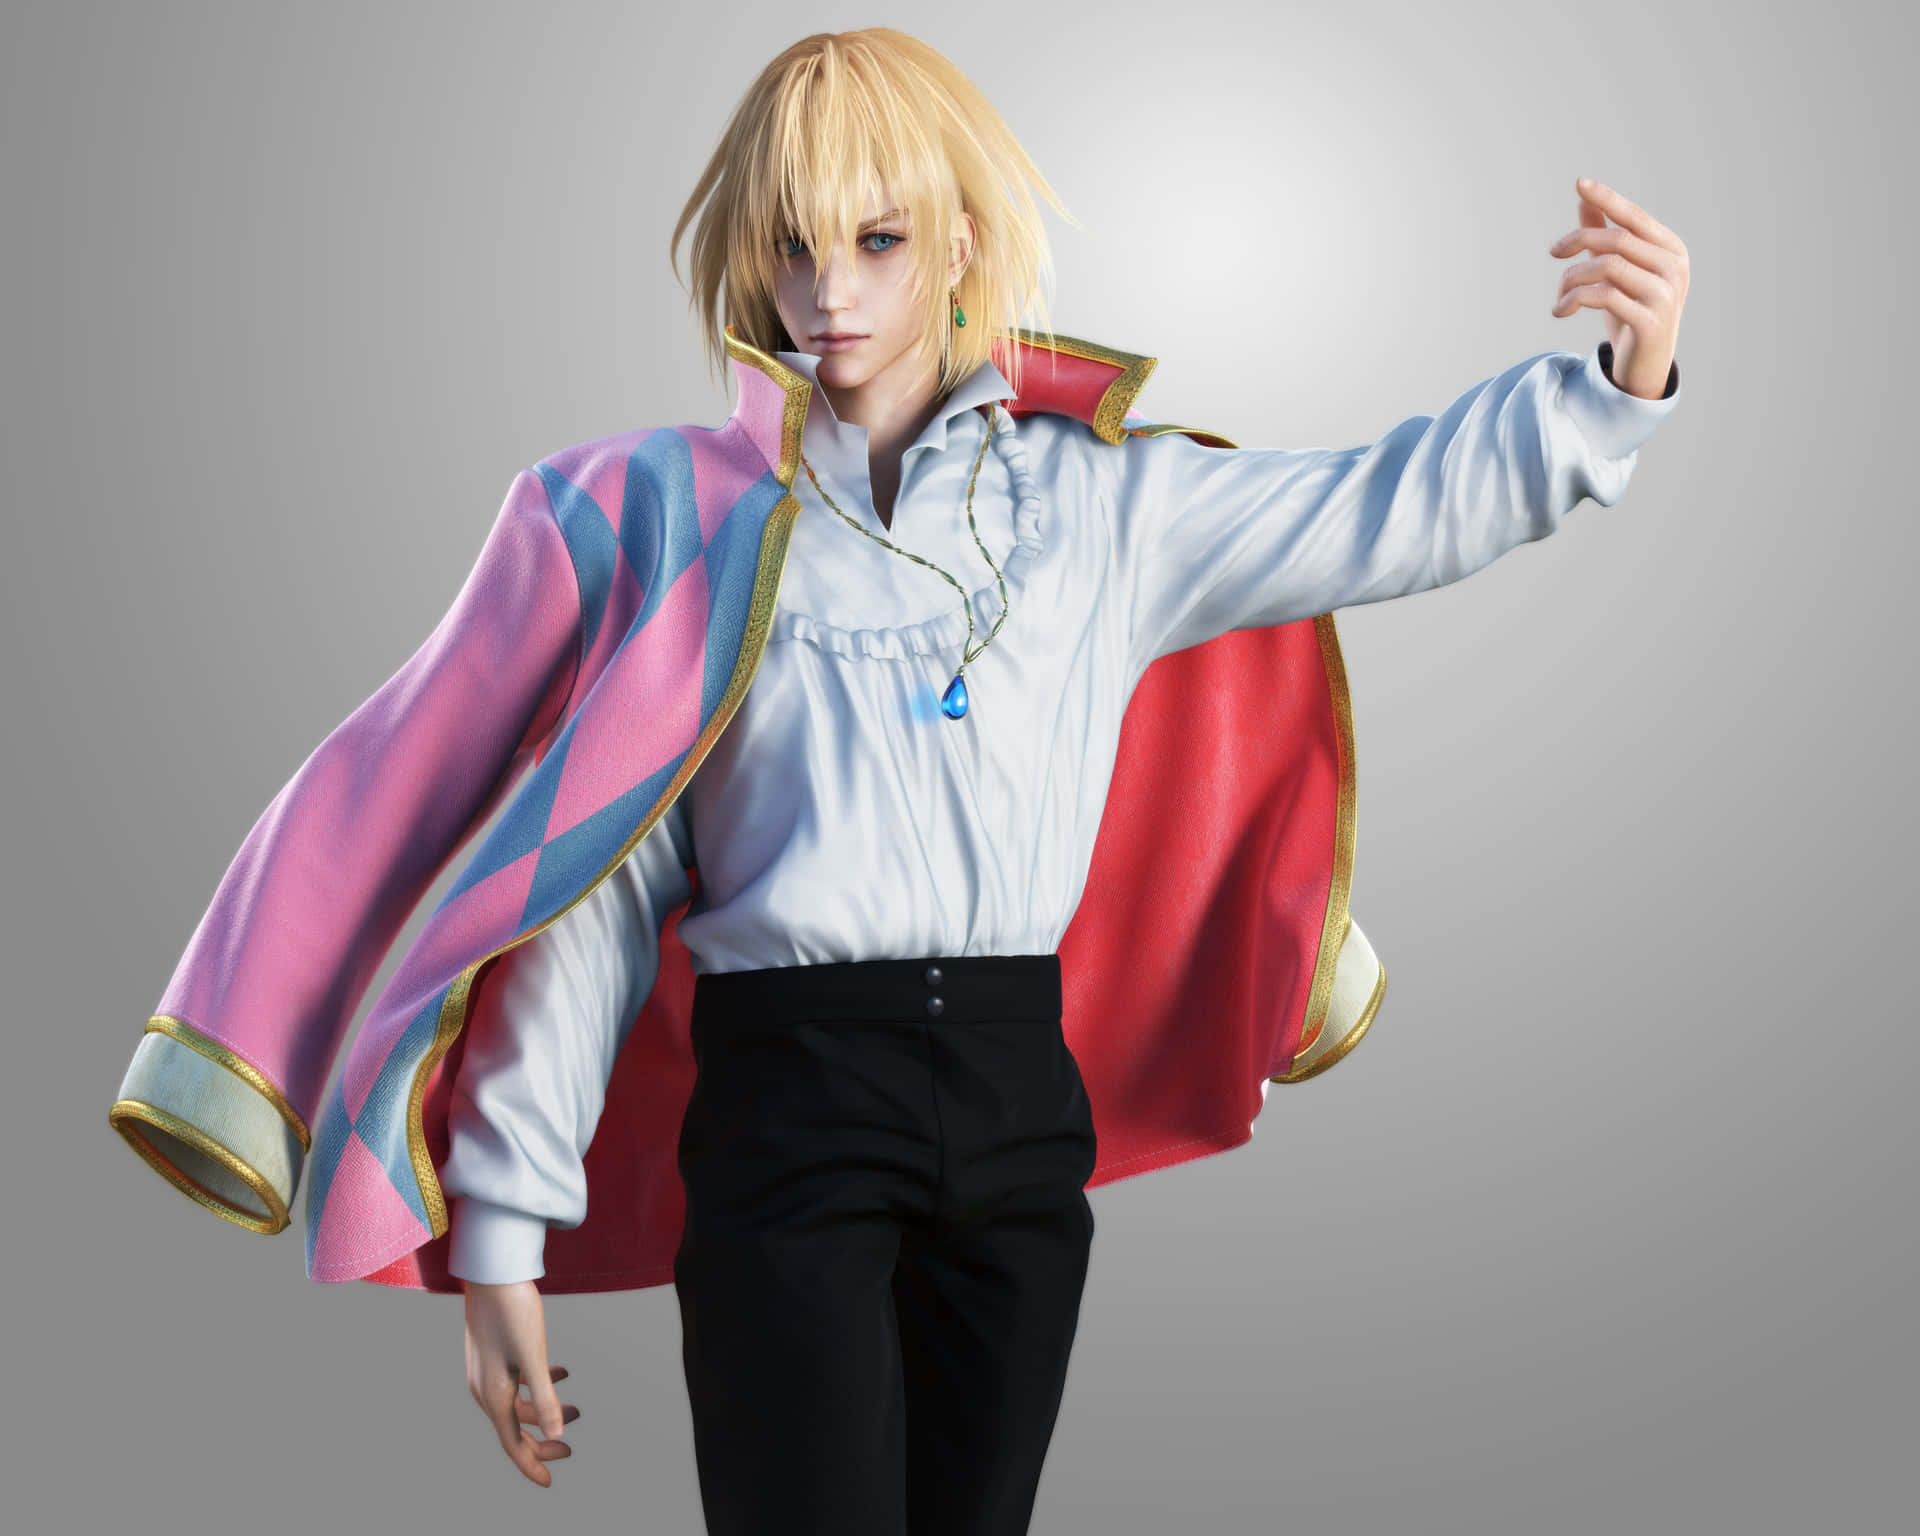 A Character With Blonde Hair And A Pink Cape